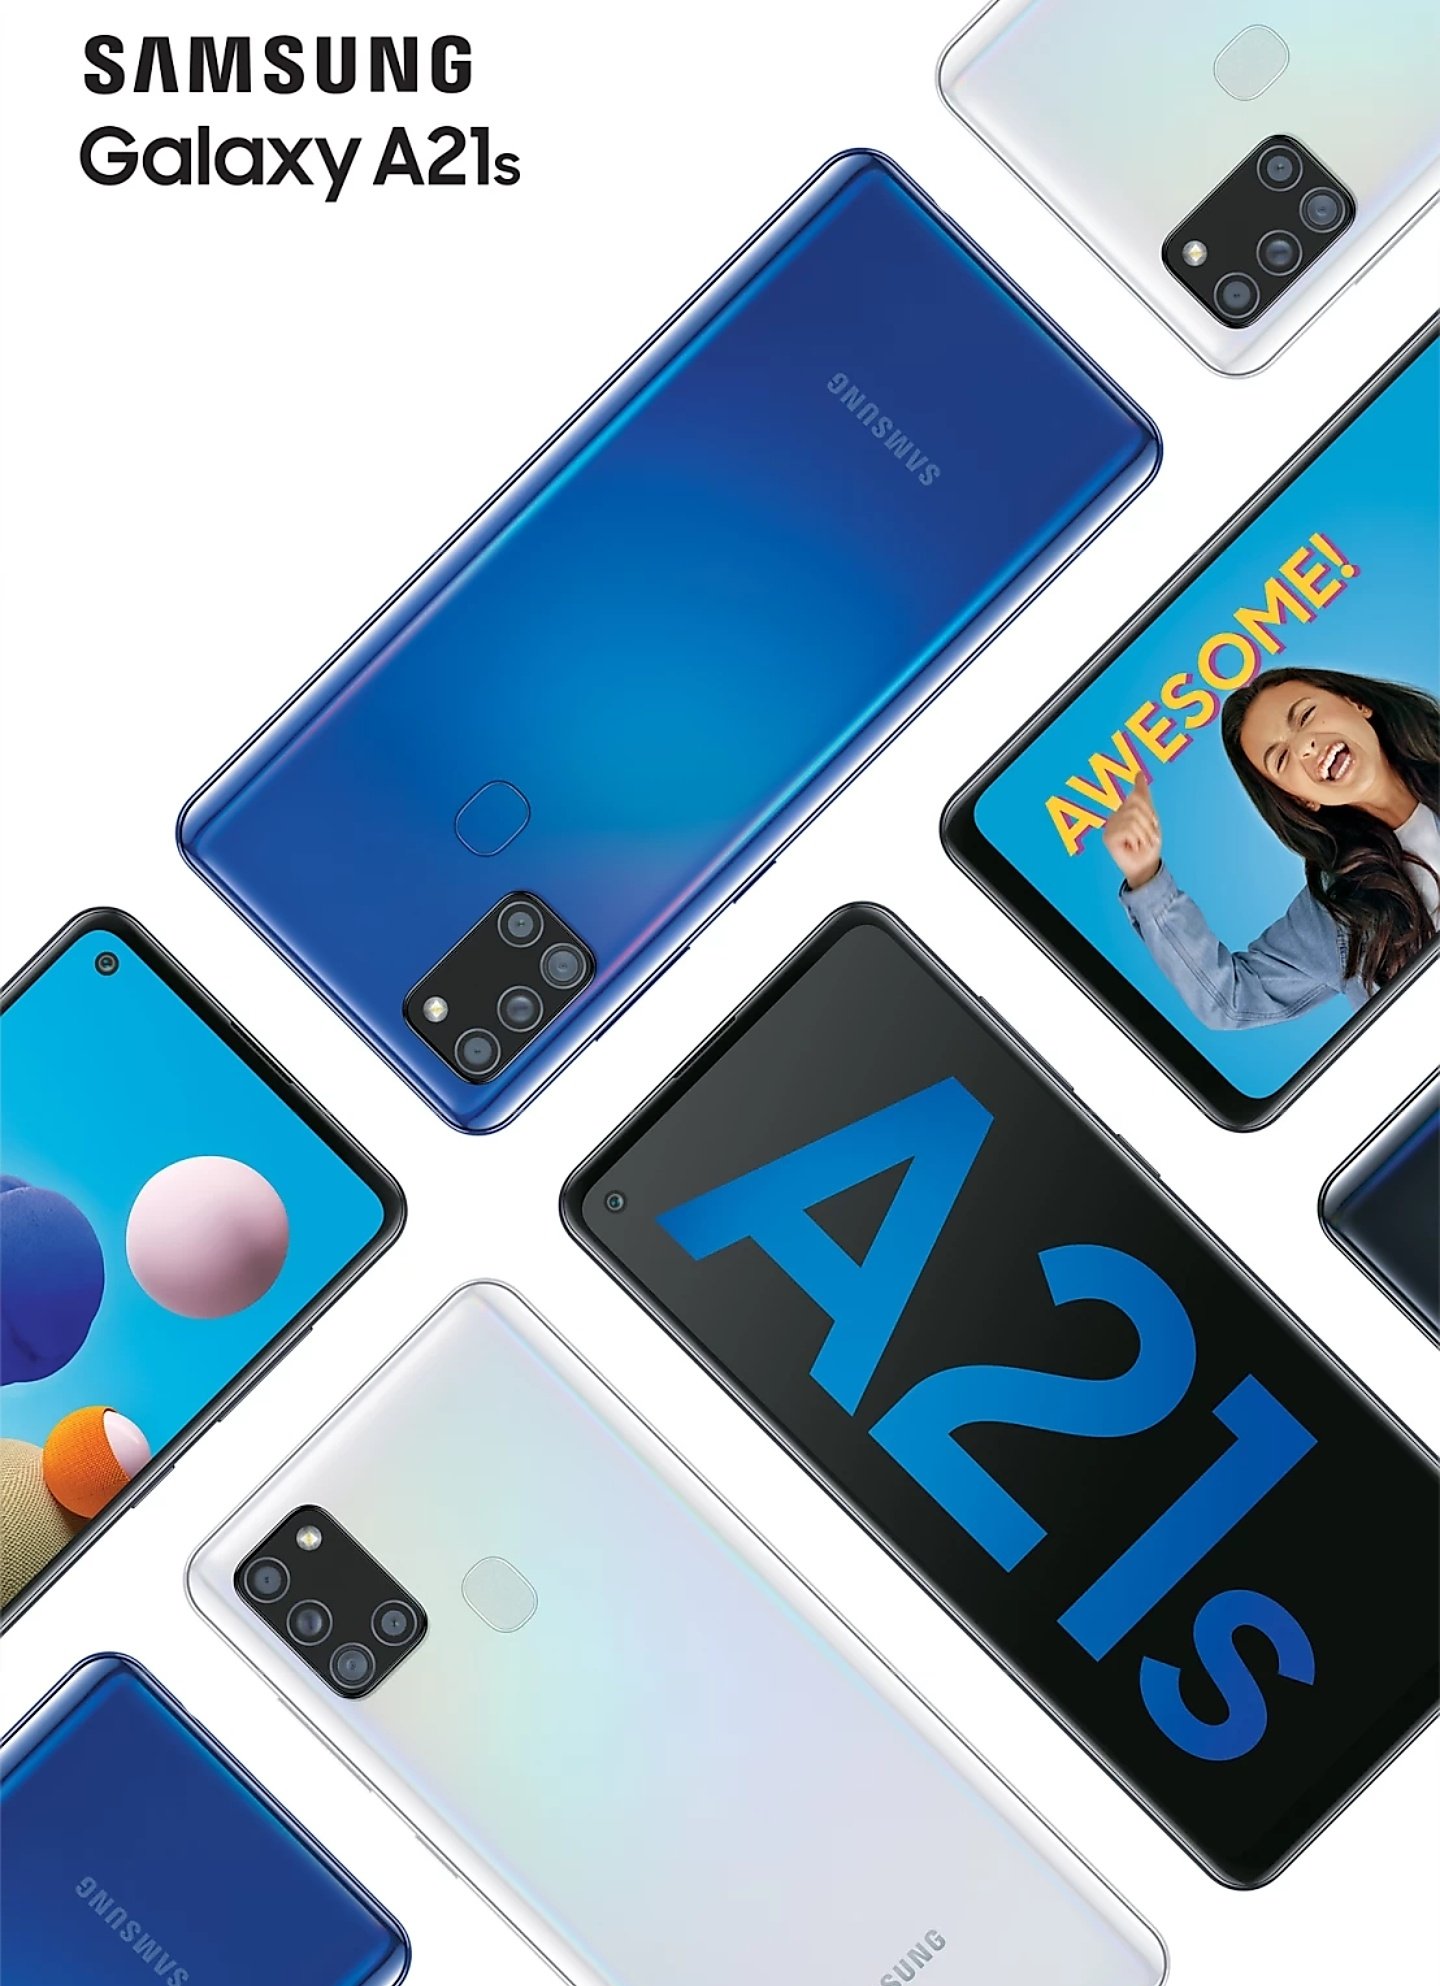 Samsung Galaxy A21s Launched in India With 5,000mAh Battery, Quad Cameras, Price, Specifications